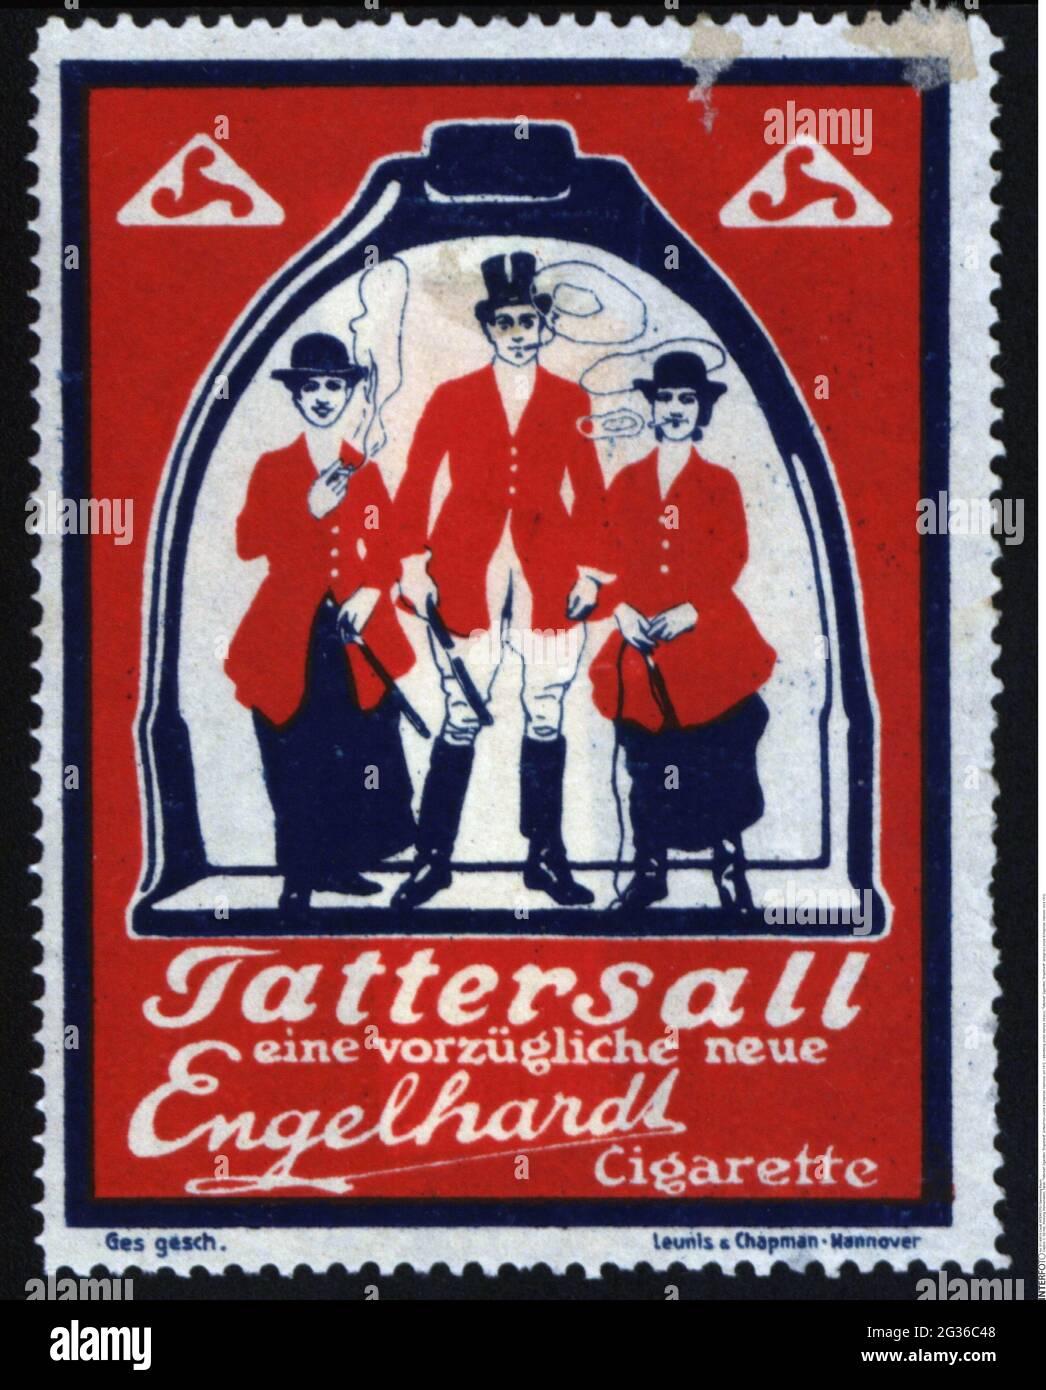 advertising, poster stamps, tobacco, 'Tattersall' Zigaretten, 'Engelhardt', design by Lenuis &Chapman, ADDITIONAL-RIGHTS-CLEARANCE-INFO-NOT-AVAILABLE Stock Photo